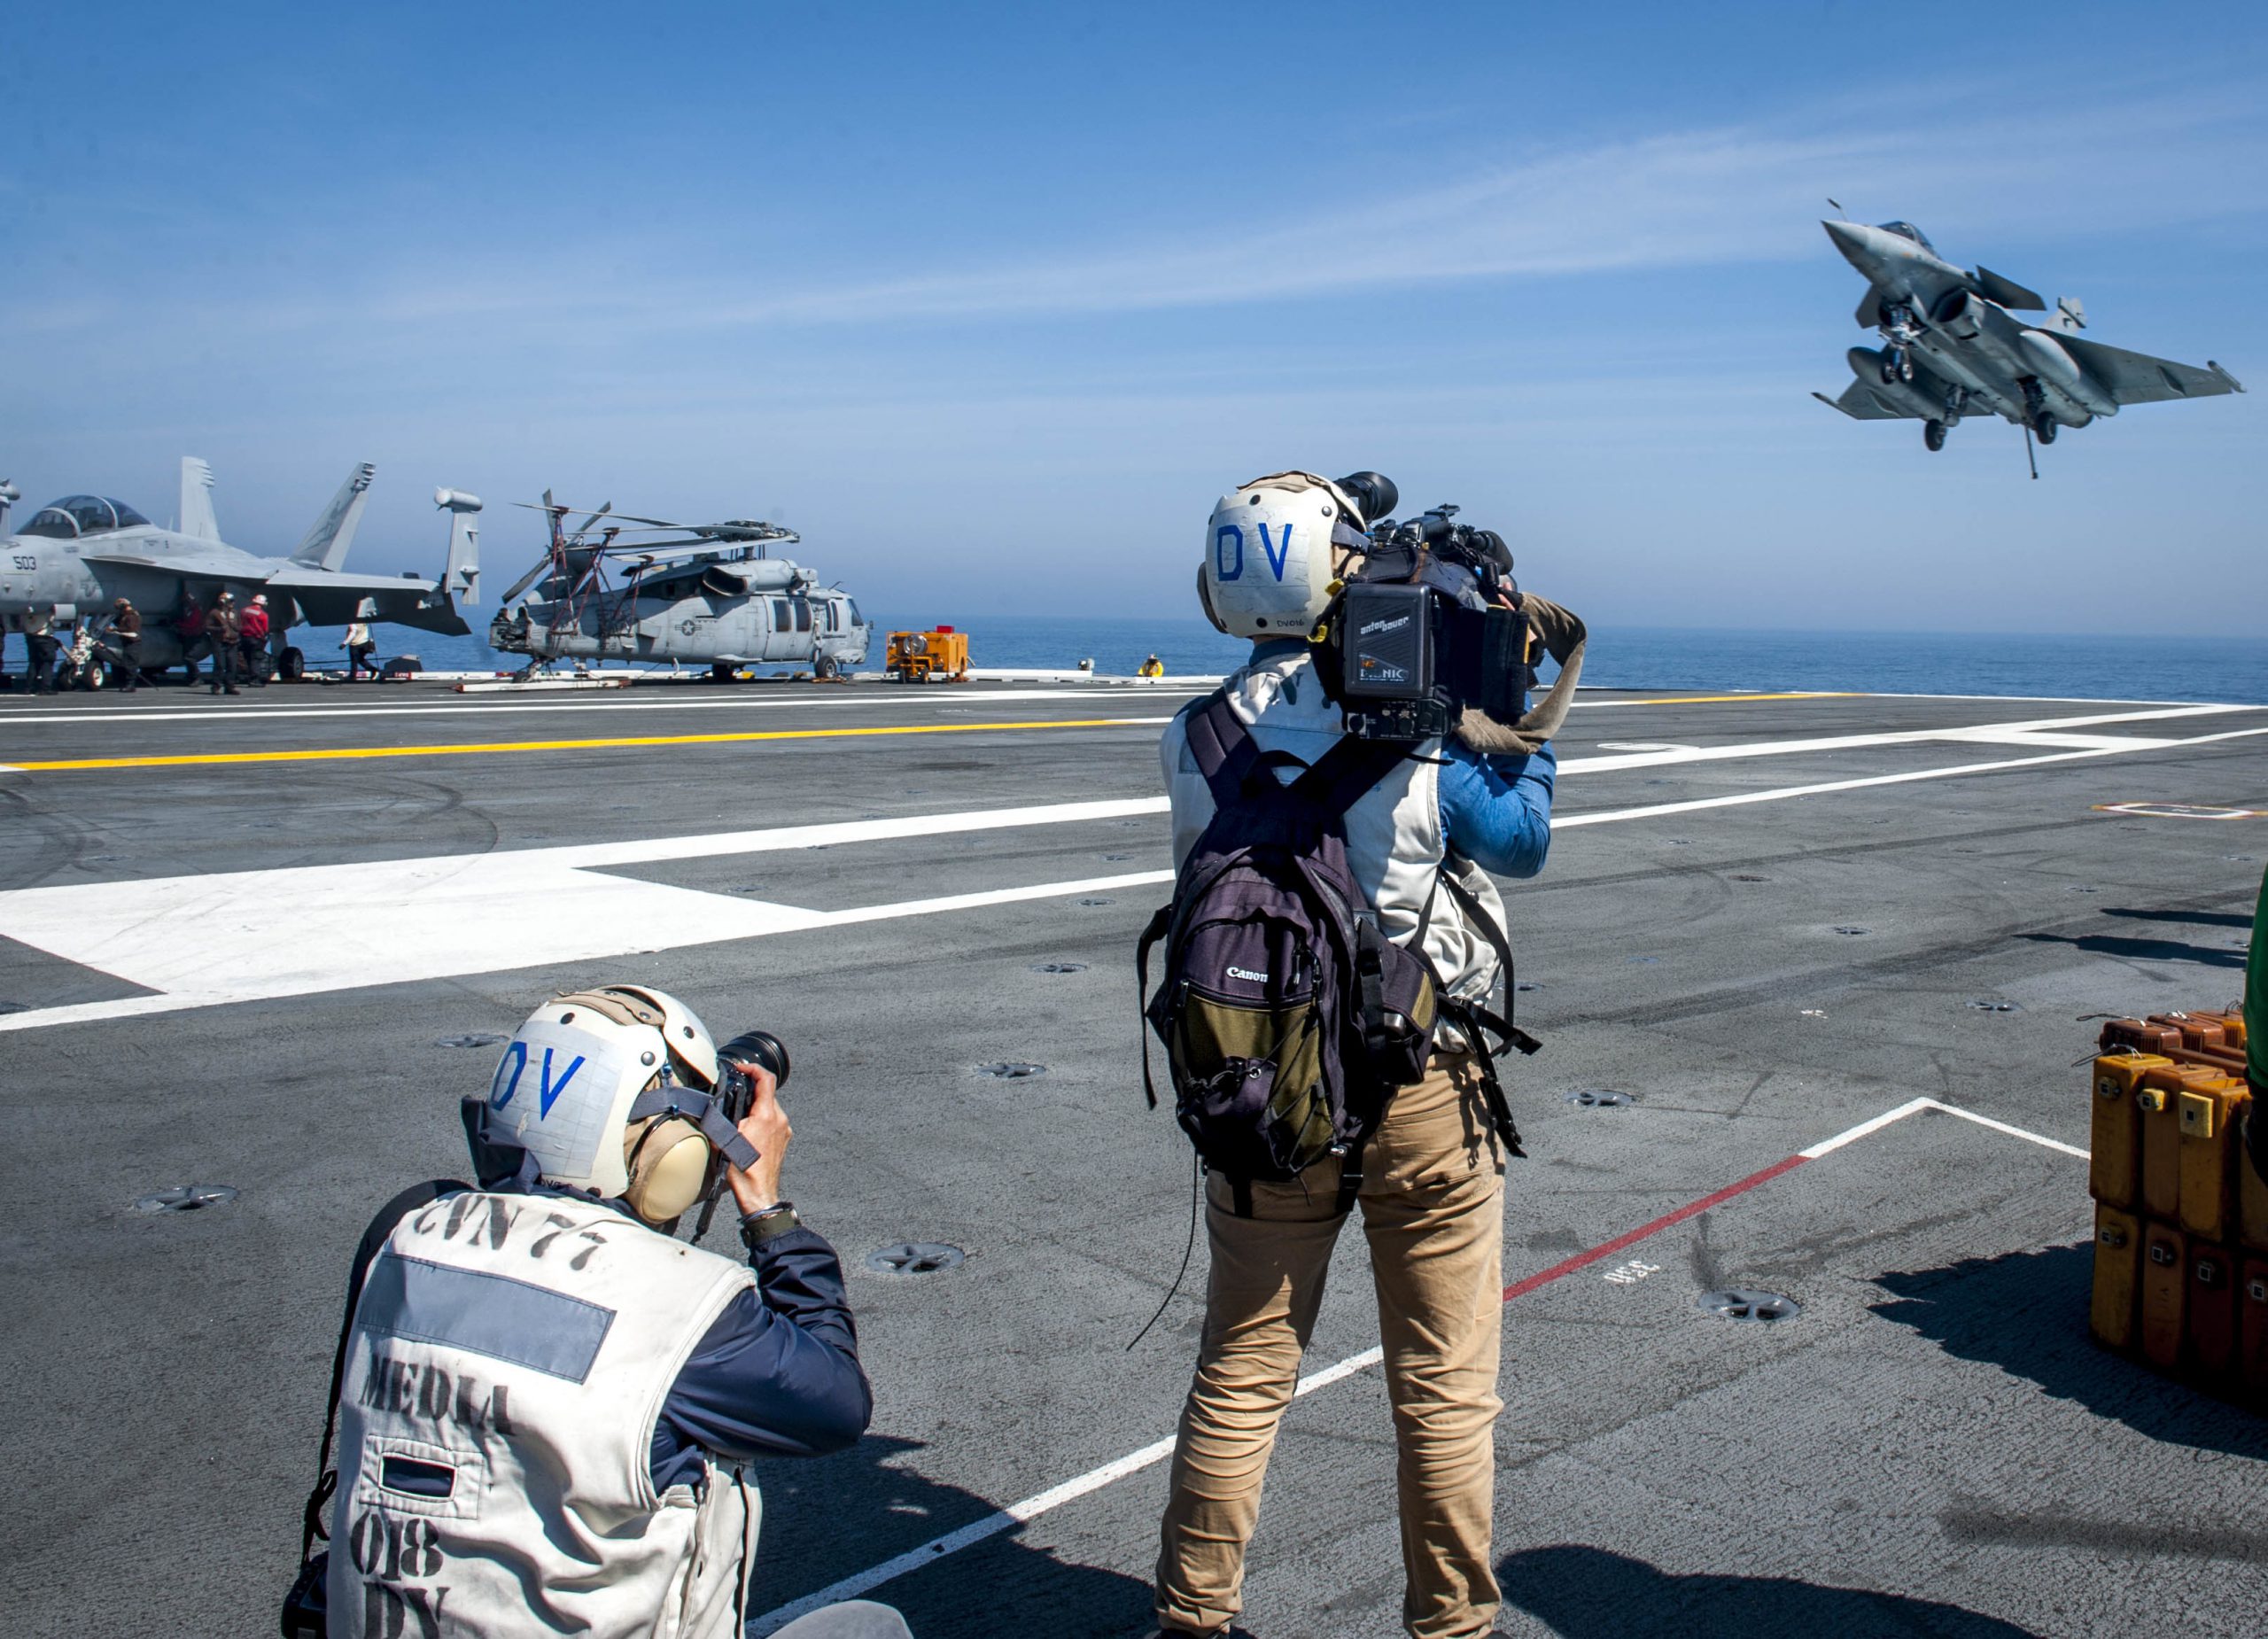 French media gather imagery and footage as a Rafale French navy aircraft attached to prepares to launch during flight operations aboard the aircraft carrier USS George H.W. Bush in the Atlantic Ocean, May 11, 2018. The carrier is conducting air wing exercises with the French navy to strengthen partnerships and deepen interoperability between the two nations' naval forces. Navy photo by Petty Officer 3rd Class Brooke Macchietto. -